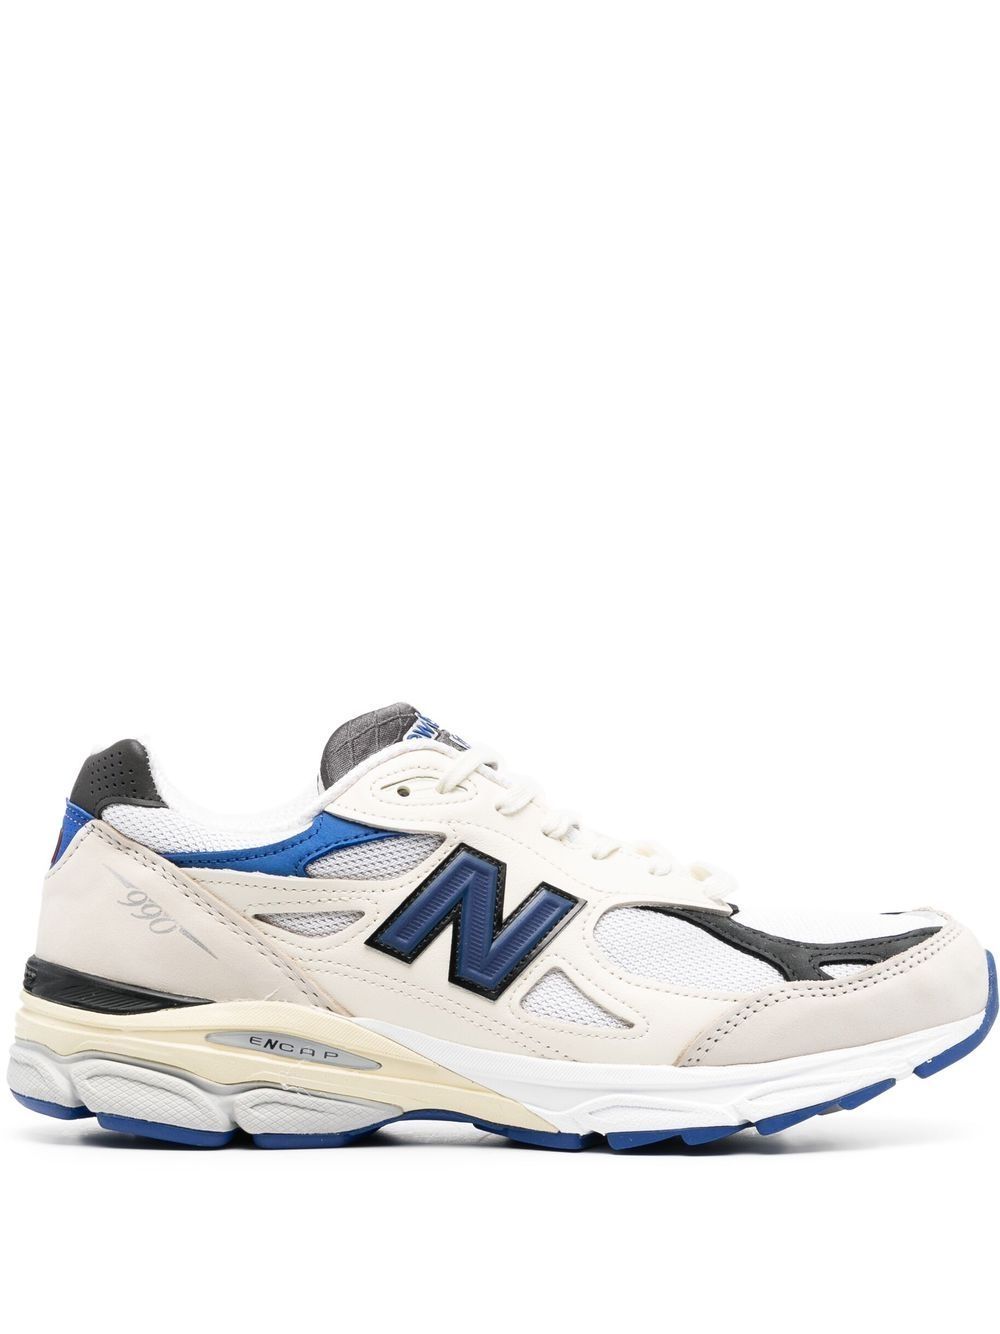 New Balance 990v3 low-top sneakers - White